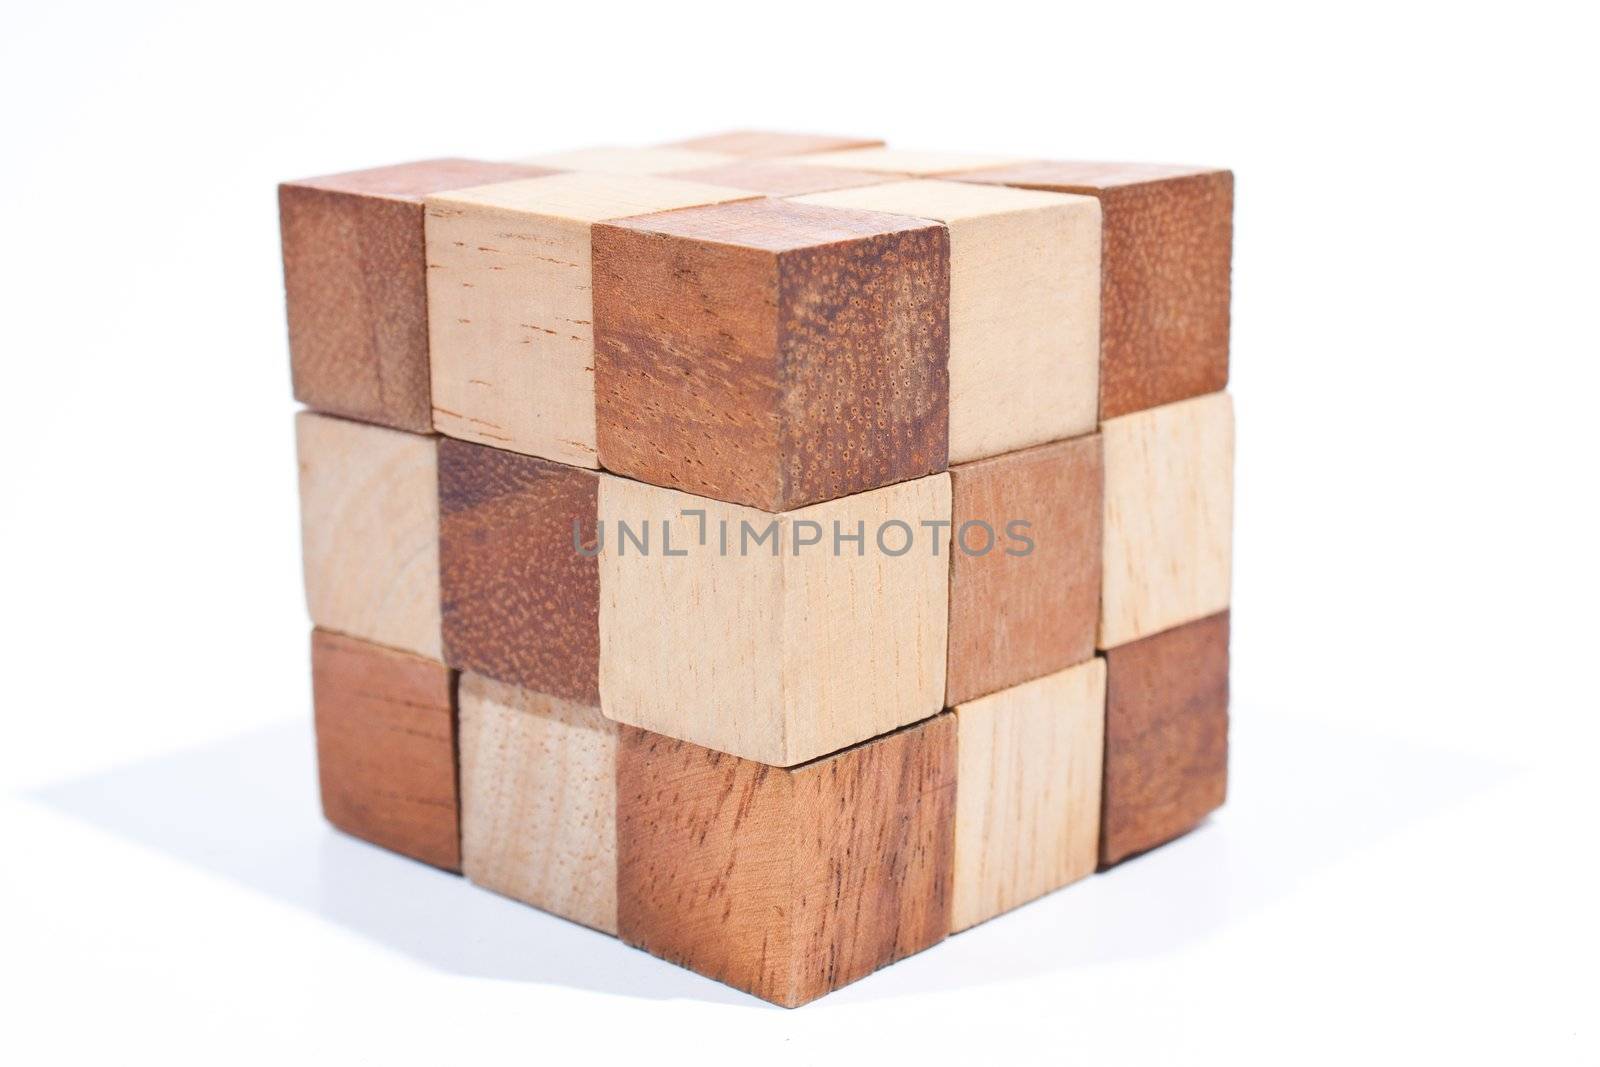 Wooden toy cube. Placed on a white background, then shoot.